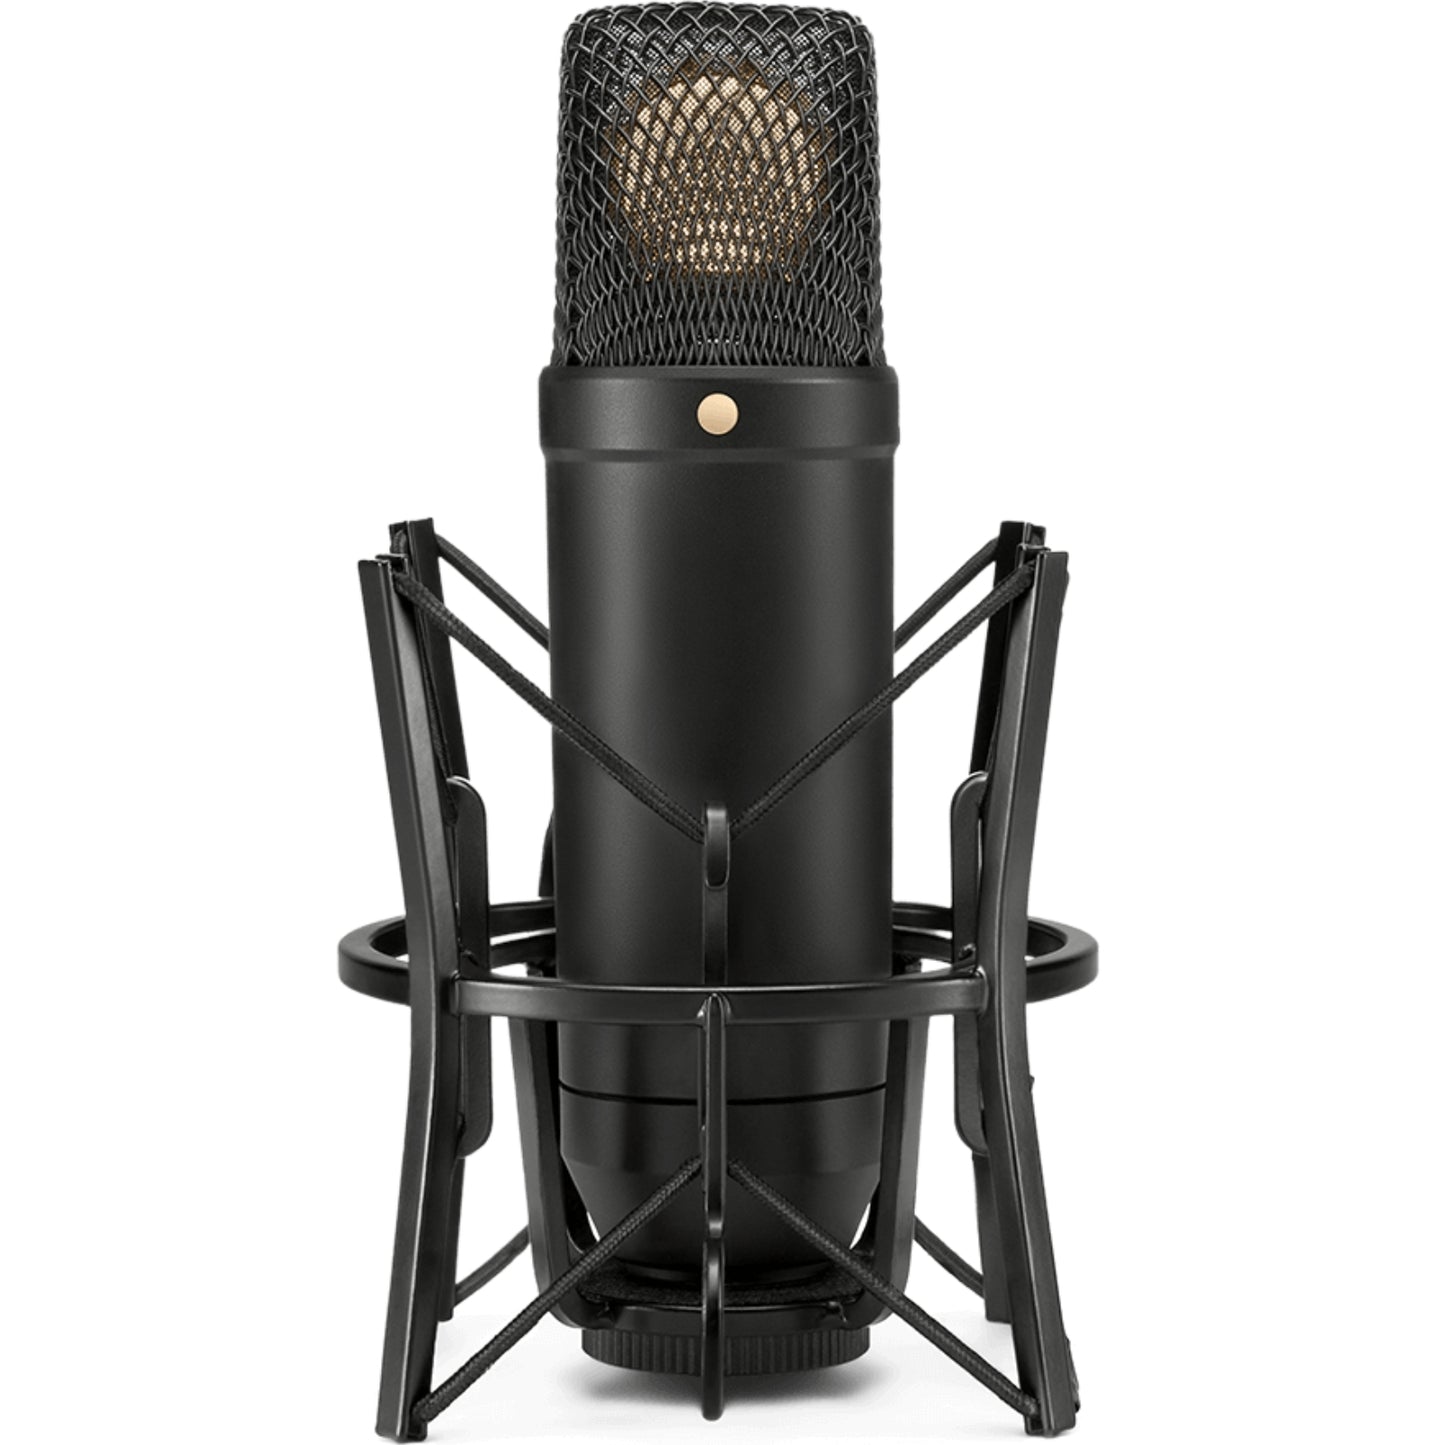 Rode NT1-KIT Cardioid Condenser Microphone